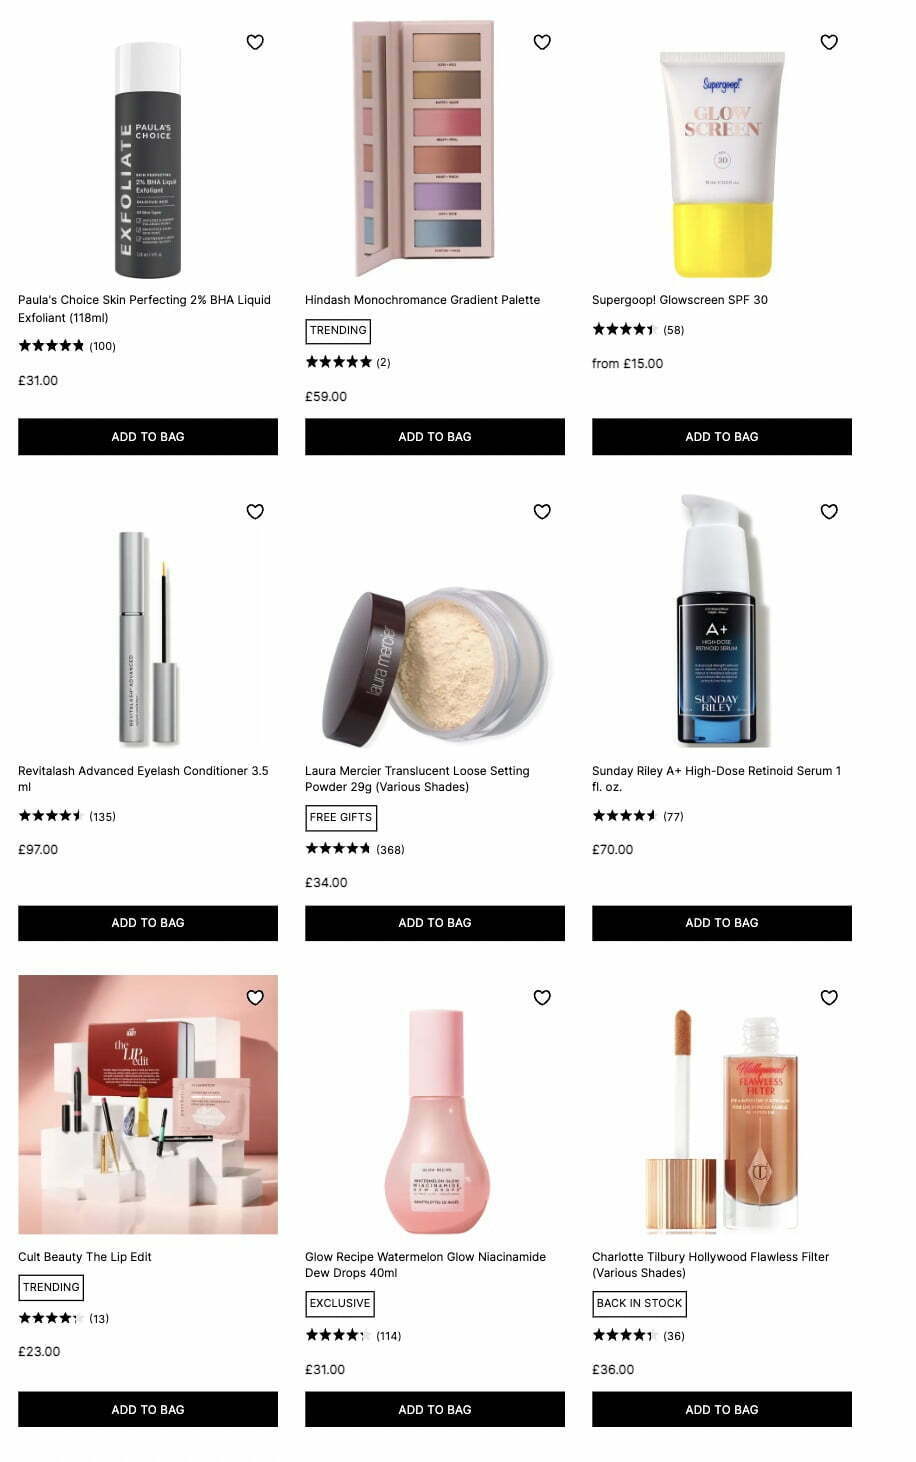 20% OFF (almost) everything at Cult Beauty